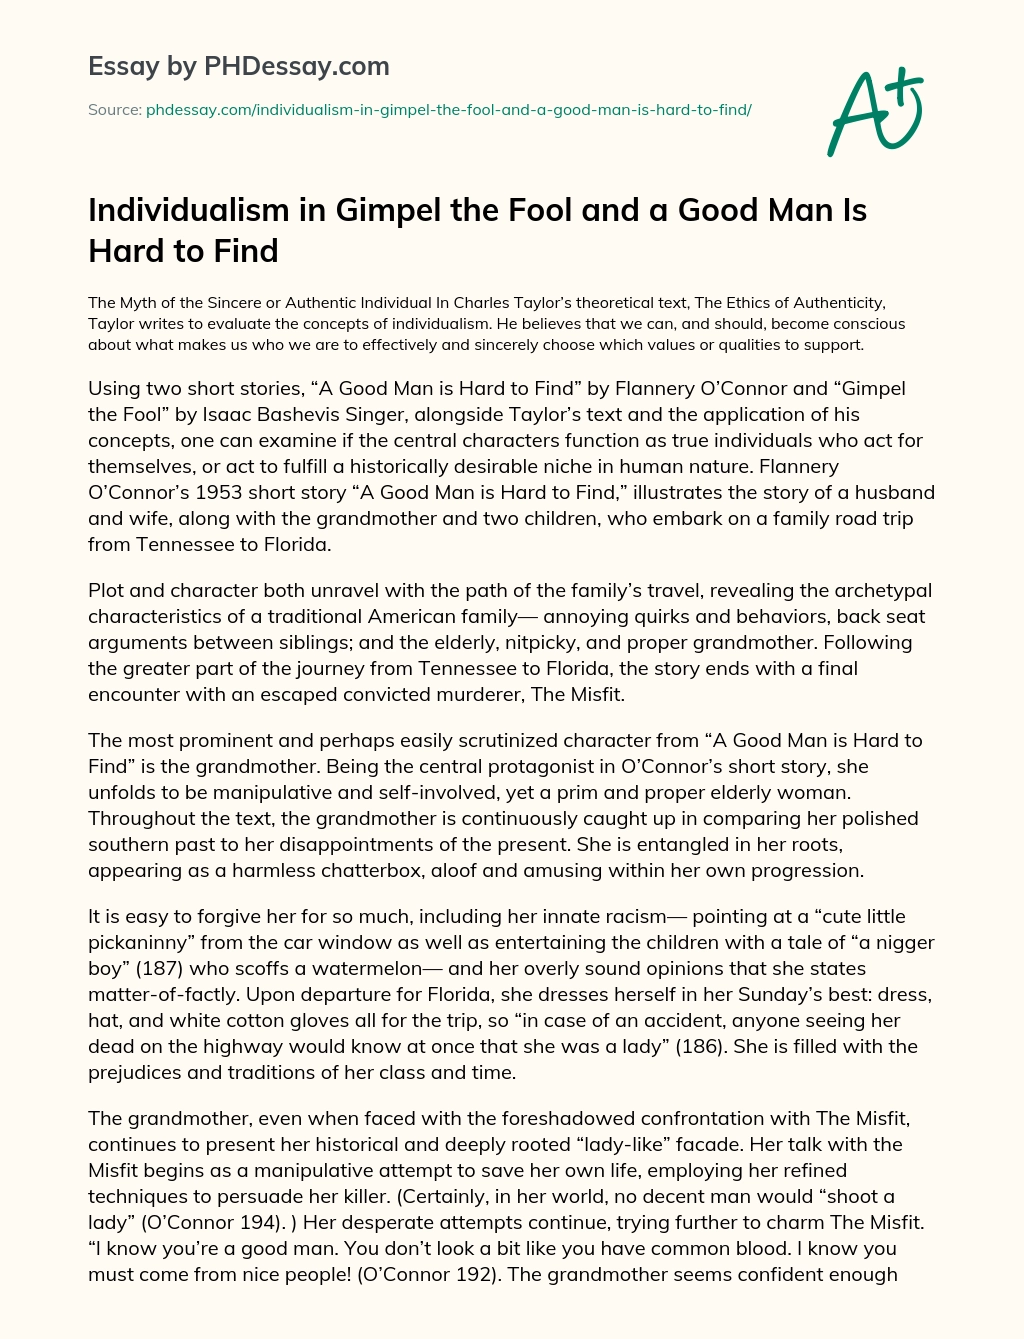 Individualism in Gimpel the Fool and a Good Man Is Hard to Find essay